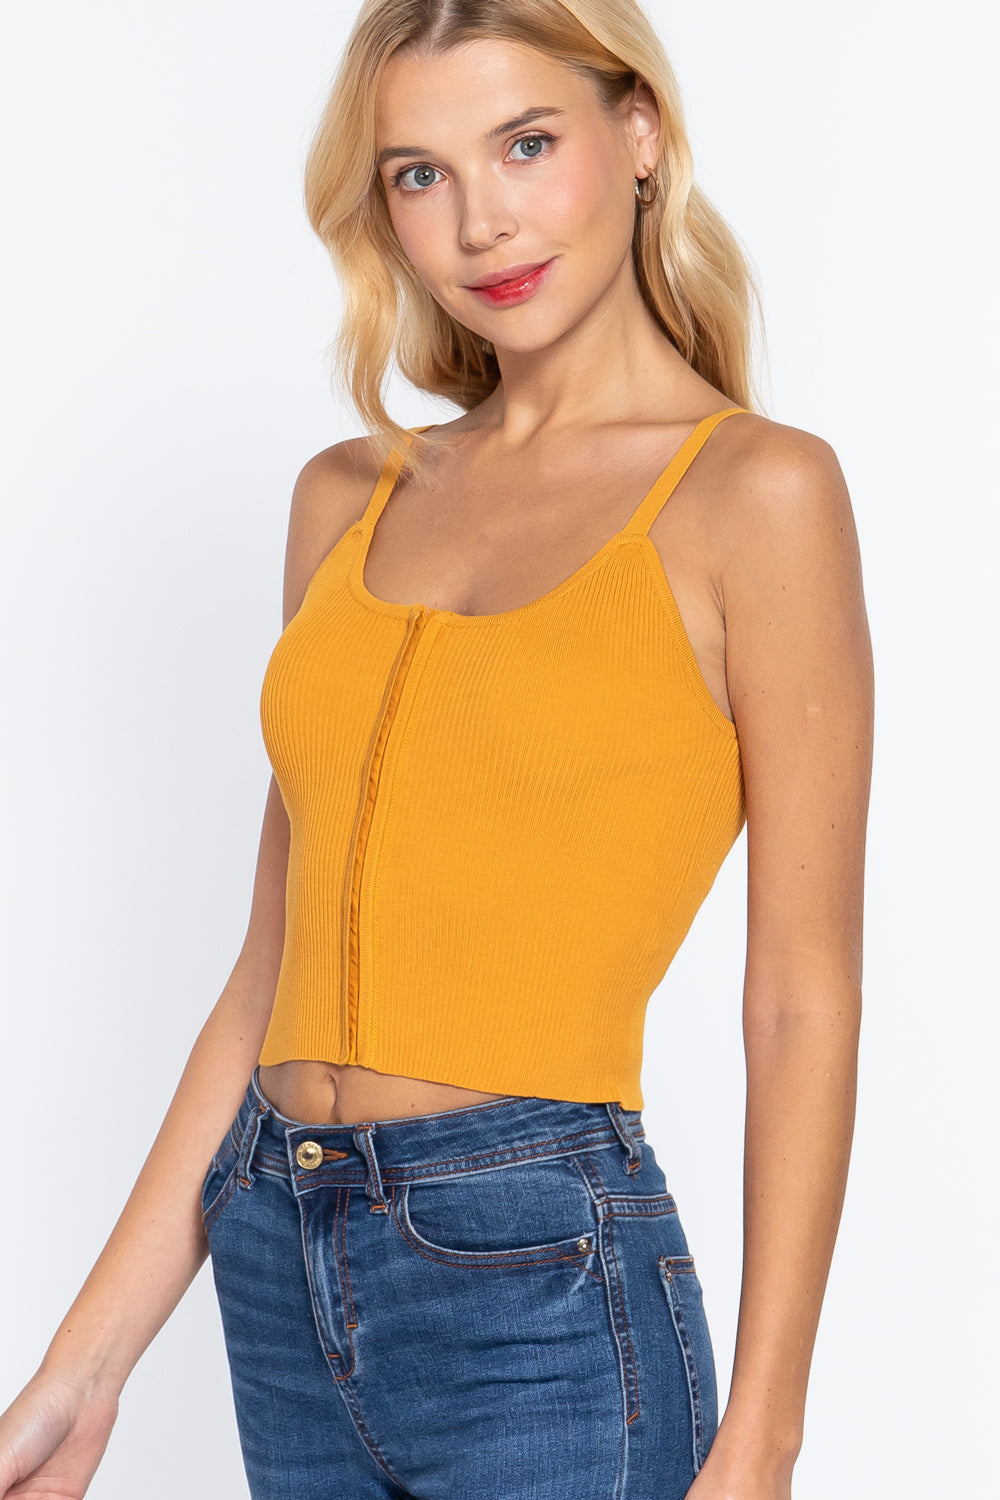 Front Closure Mango Yellow With Hooks Sweater Cami Top Shirts & Tops jehouze 